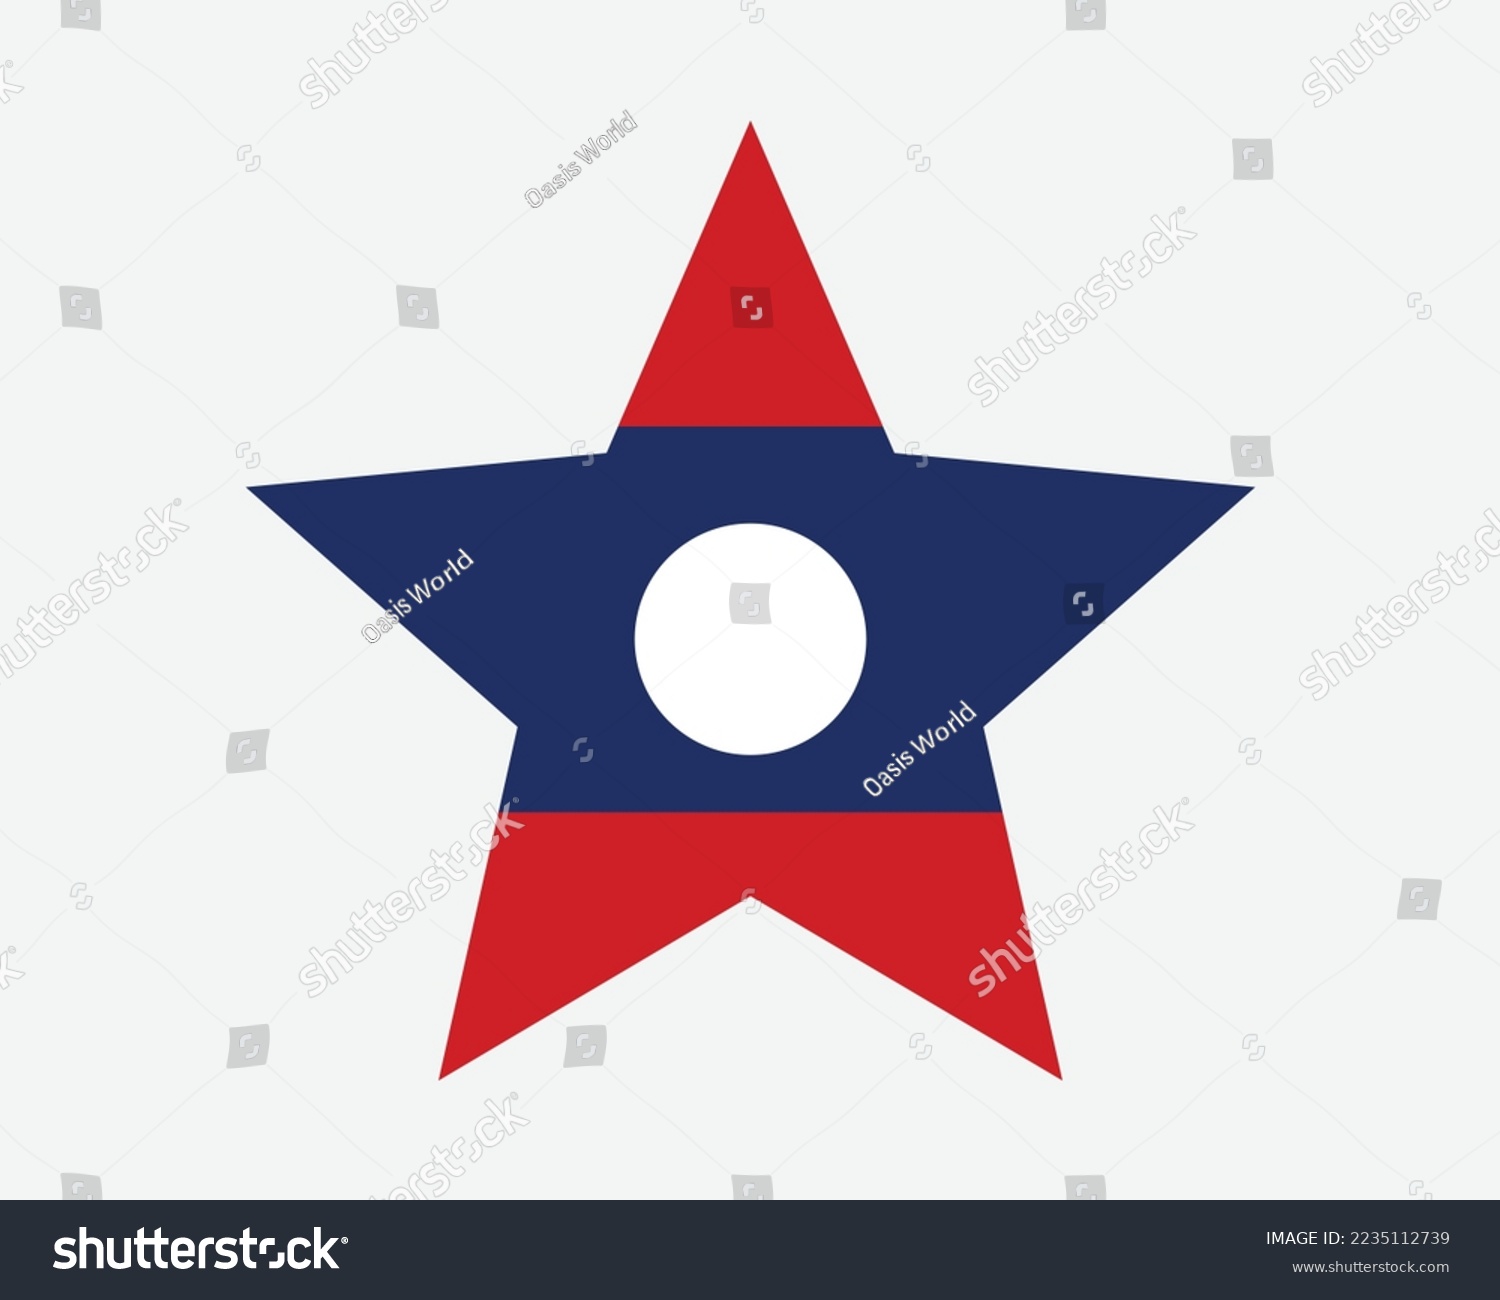 SVG of Laos Star Flag. Lao Star Shape Flag. Laotian Country National Banner Icon Symbol Vector Flat Artwork Graphic Illustration svg